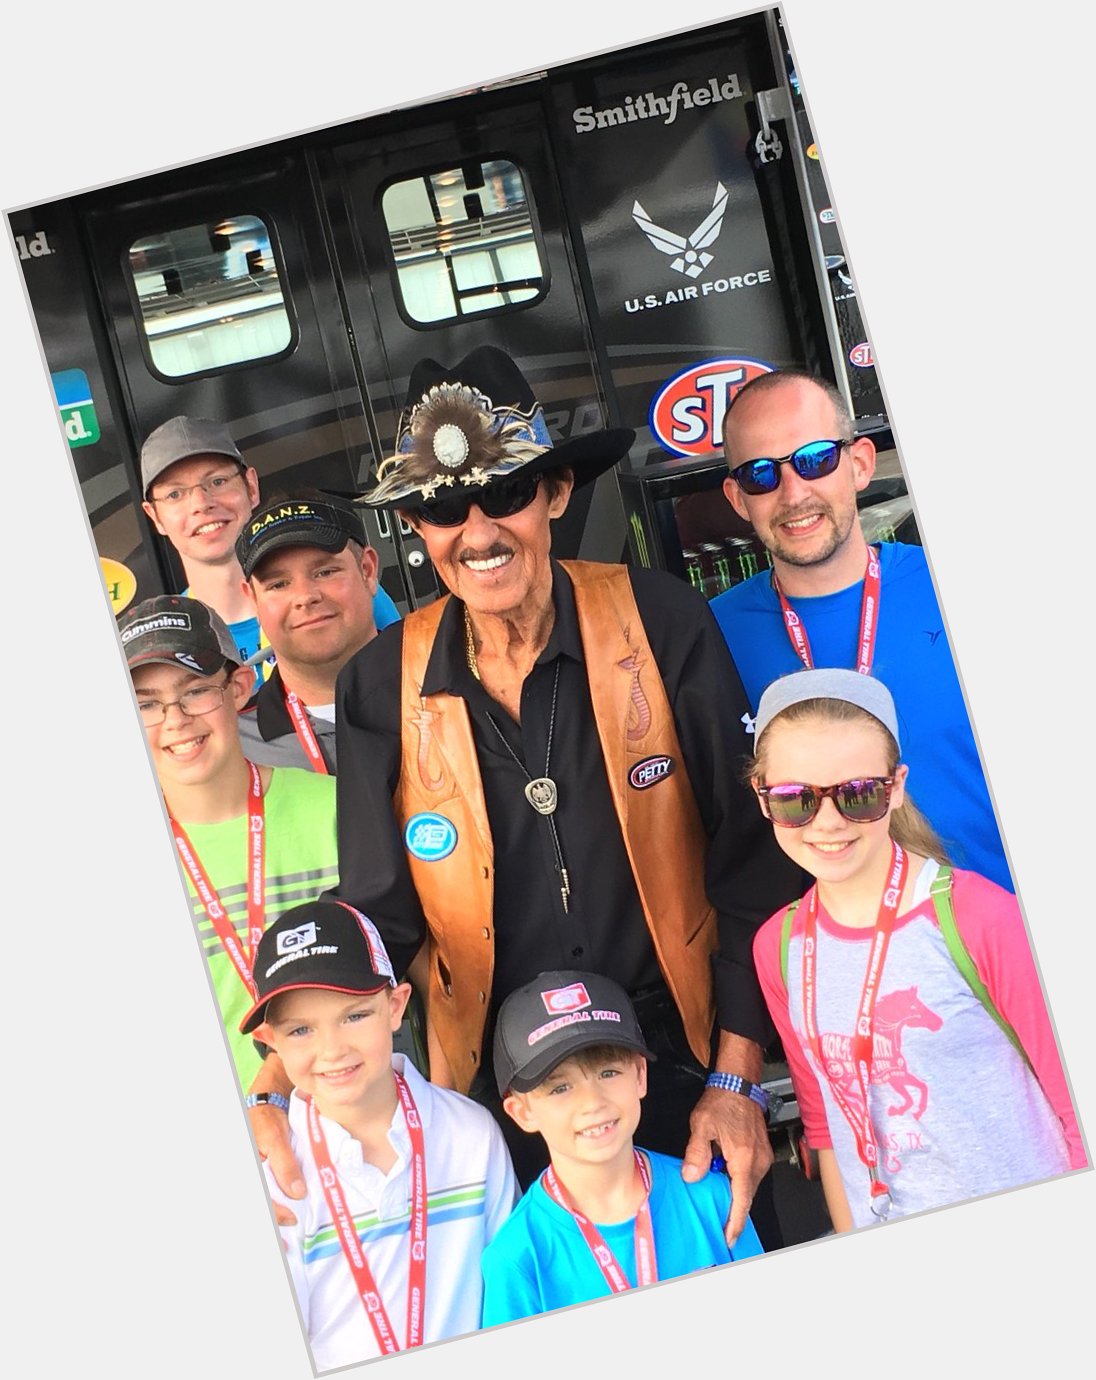 A very Happy 80th Birthday to this living legend...Richard Petty! 